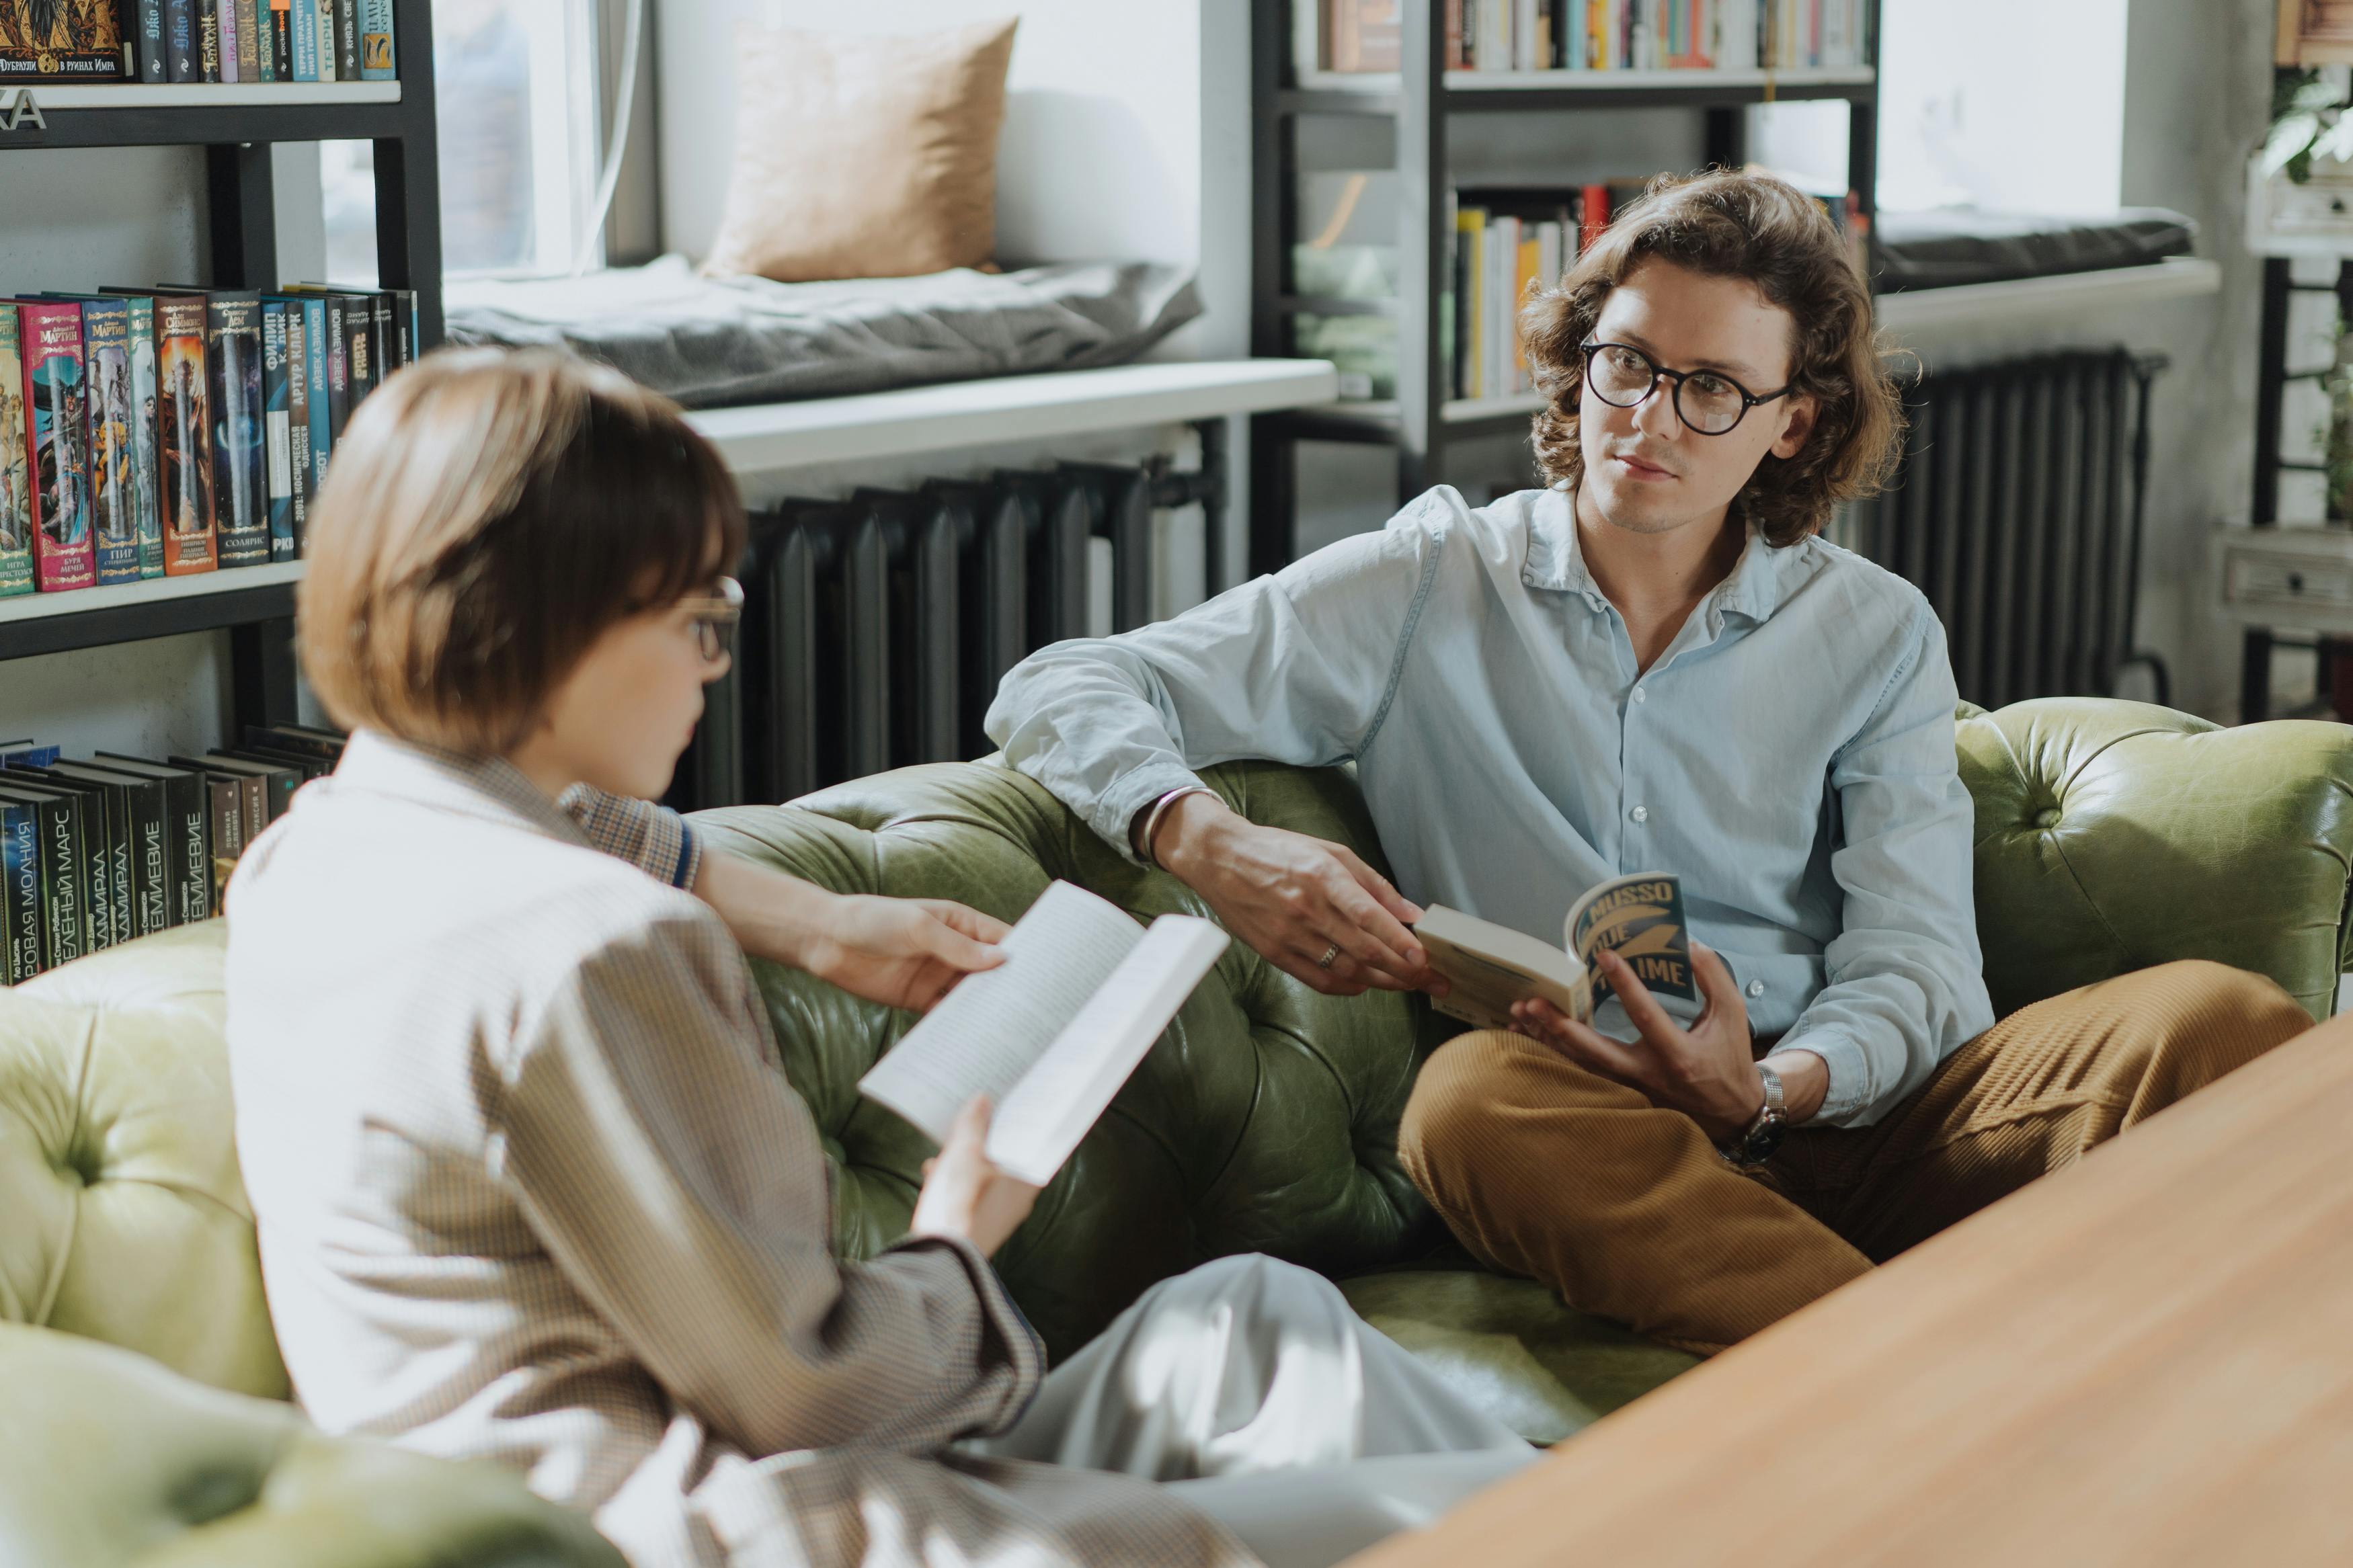 A couple reading books and talking | Source: Pexels